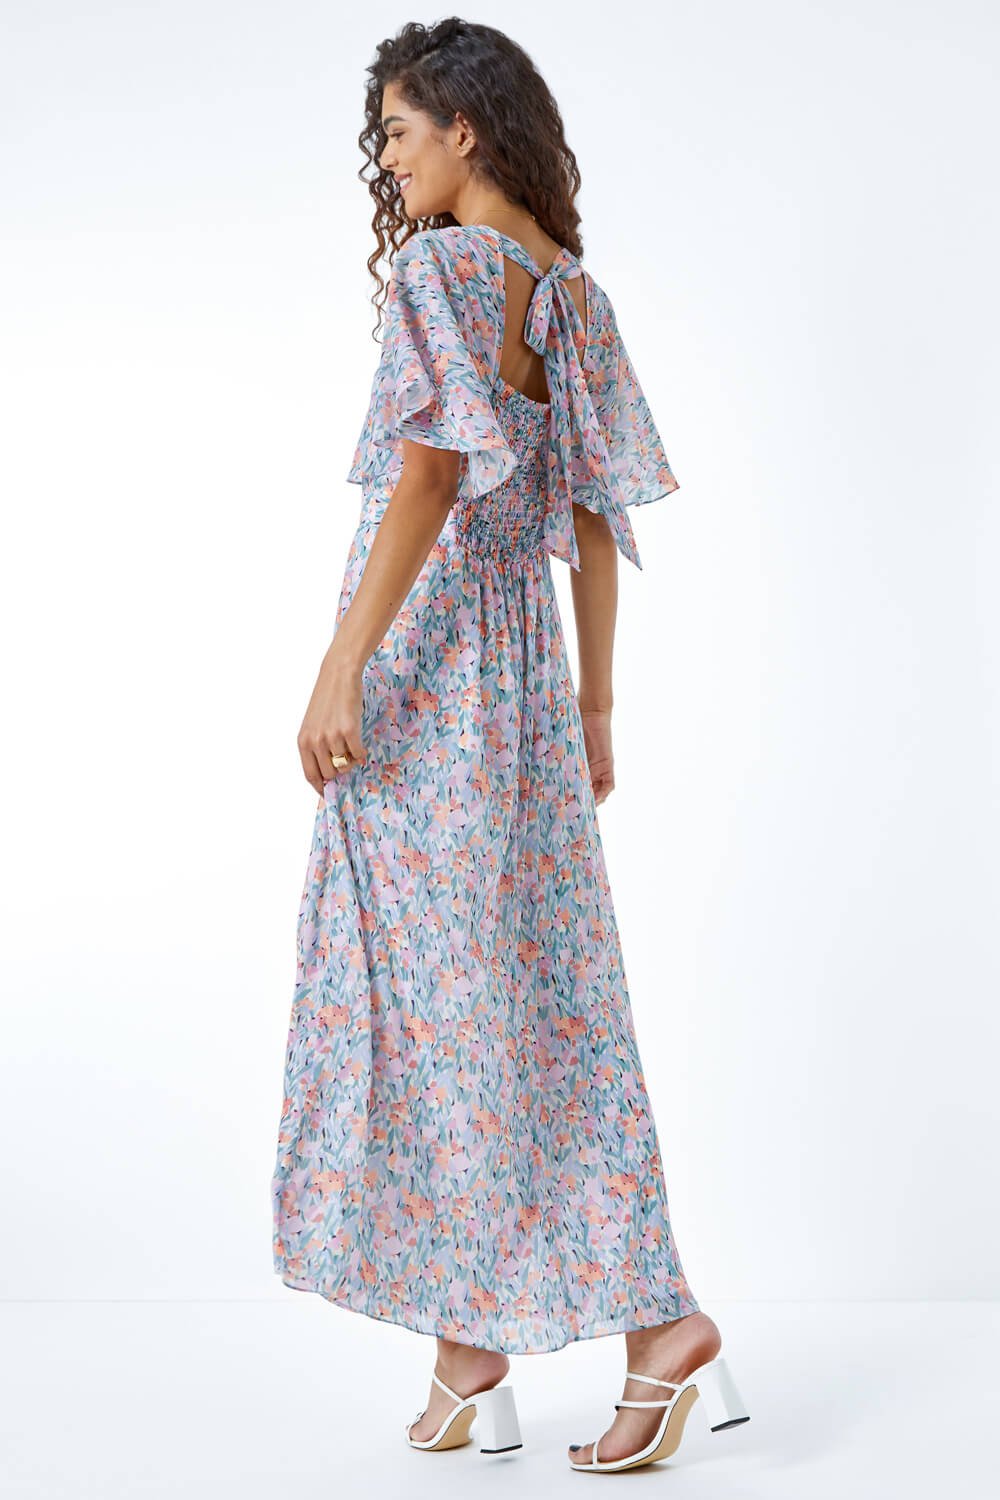 Lilac Floral Print Angel Sleeve Maxi Dress, Image 3 of 5